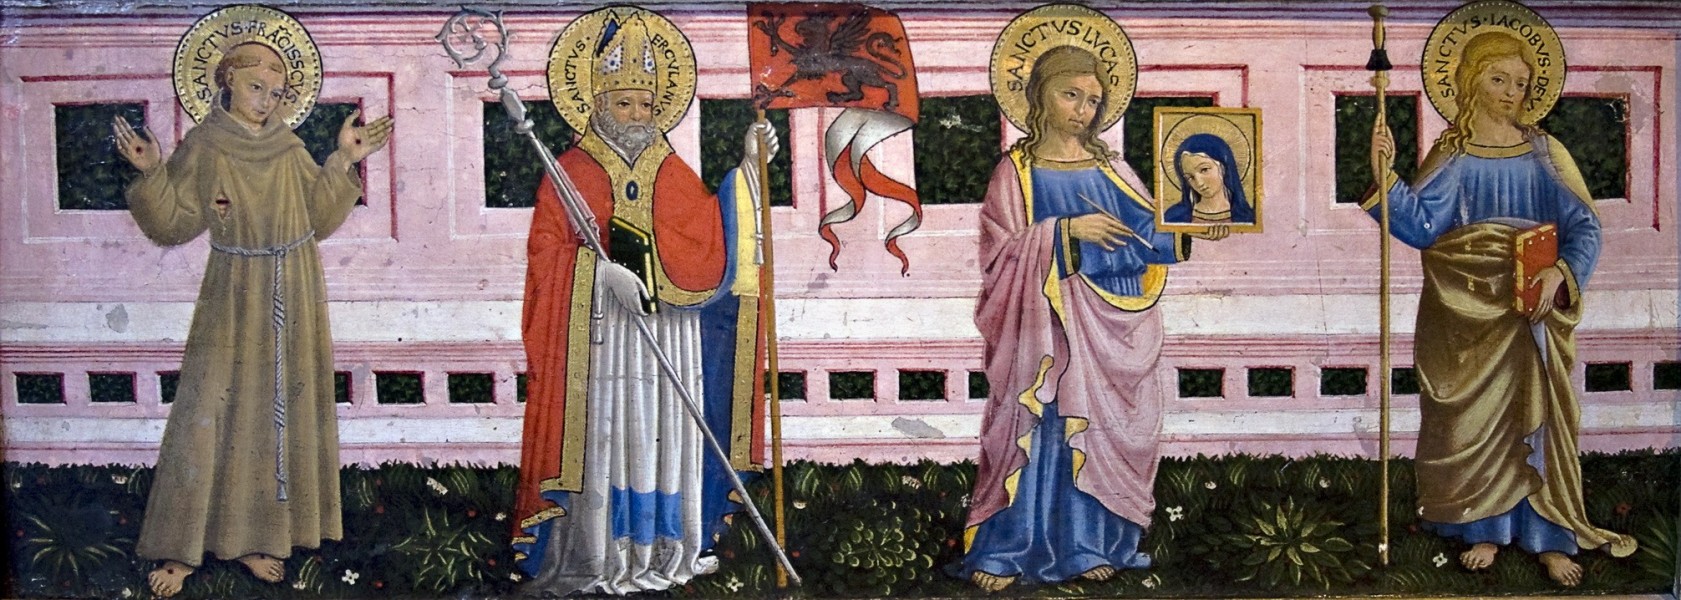 Painting by : Bartolomeo Caporali - Ss.Francis of Assisi, Herculanus, Luke and James the Greater - currently in the Hermitage, St Petersburg, Russia. Tag on exhibit reads - "entered in 1926, formerly collection G. Stroganov, Petersburg"


<a href="https://commons.wikimedia.org/wiki/File:Caporalifrancisofassisiherculanlukejamesthegreater.jpg" title="via Wikimedia Commons" target="_blank">Ealdgyth</a> / <a href="https://creativecommons.org/licenses/by-sa/3.0" target="_blank">CC BY-SA</a>